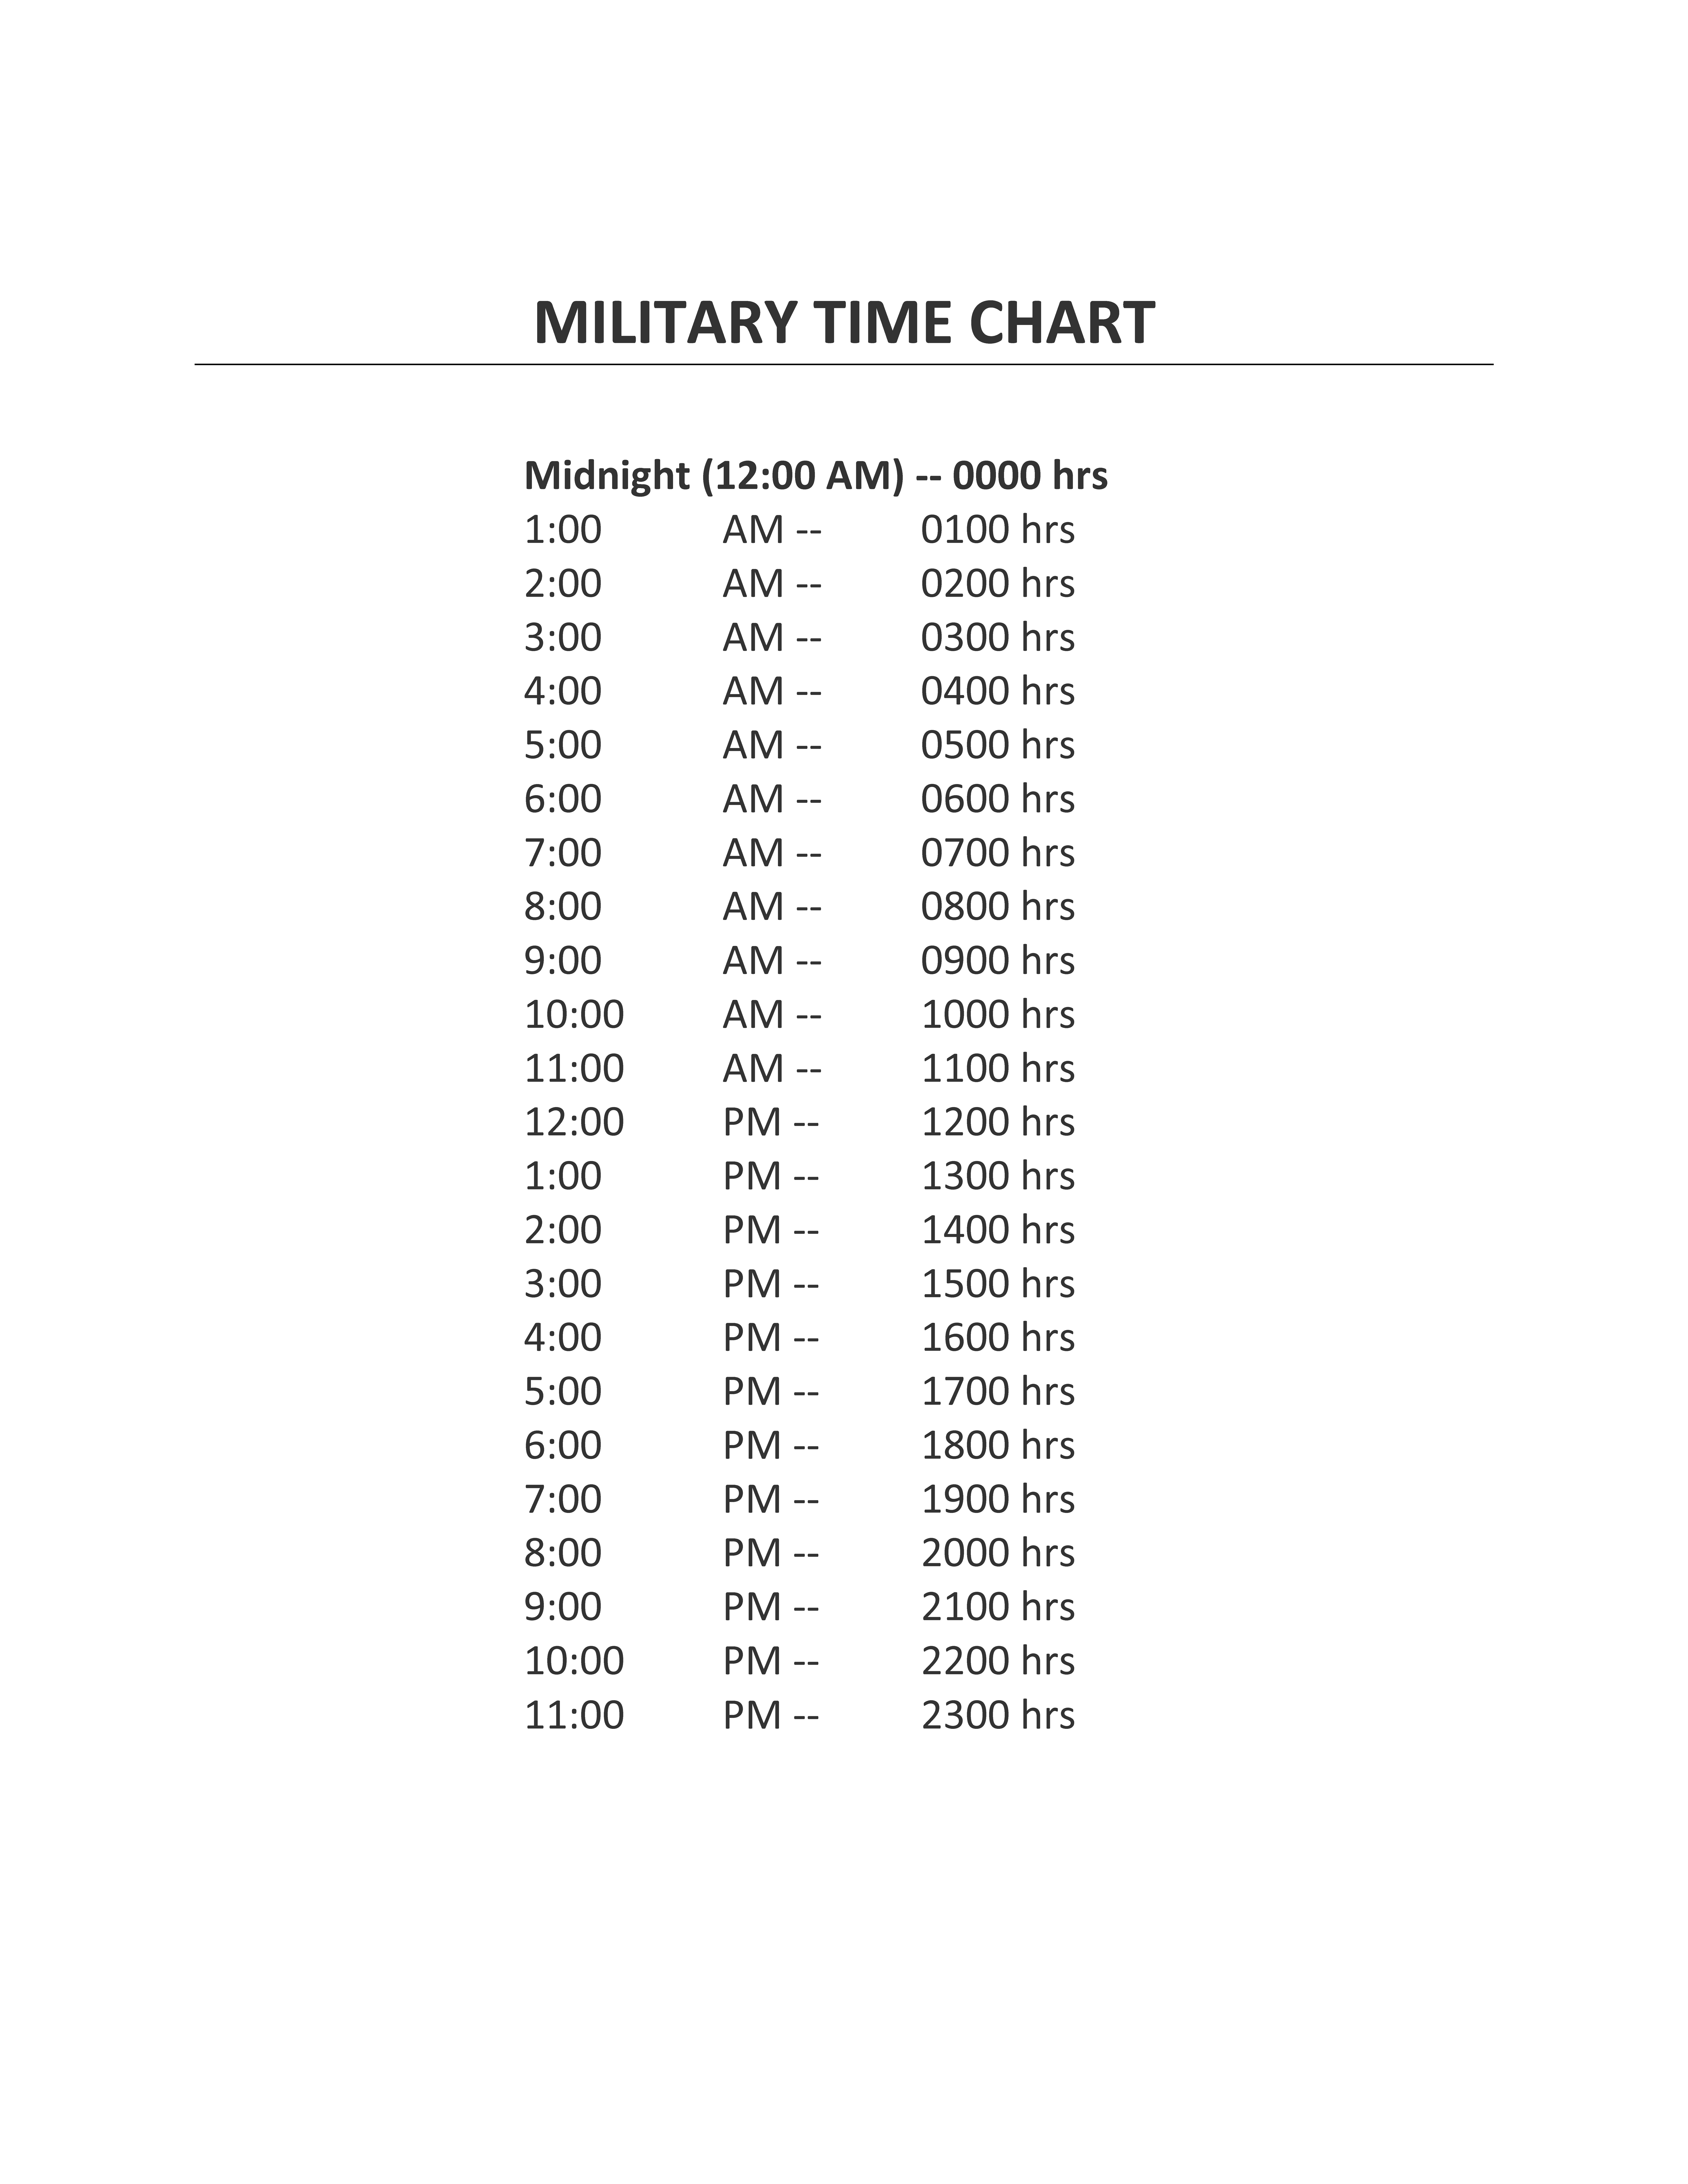 Army Time Chart 模板